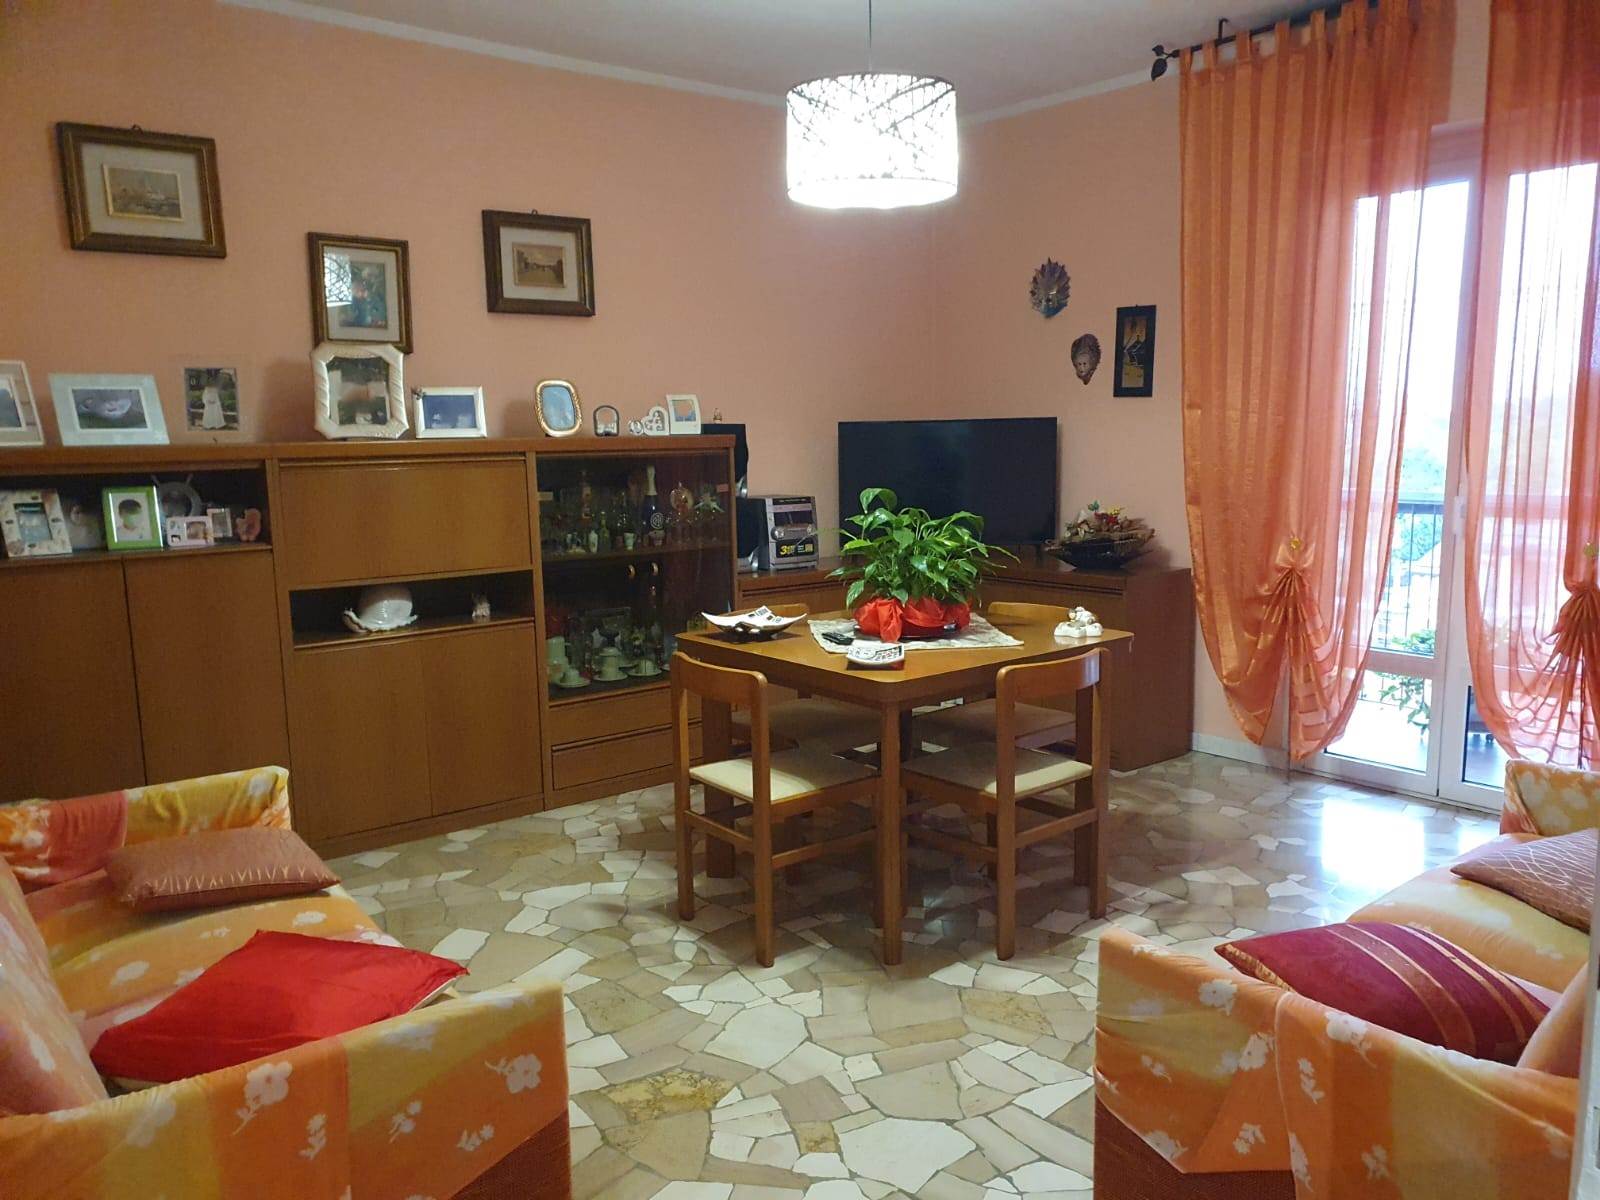 CINISELLO BALSAMO, Apartment for sale of 83 Sq. mt., Good condition, Heating Centralized, Energetic class: G, Epi: 175 kwh/m2 year, placed at 5° on 